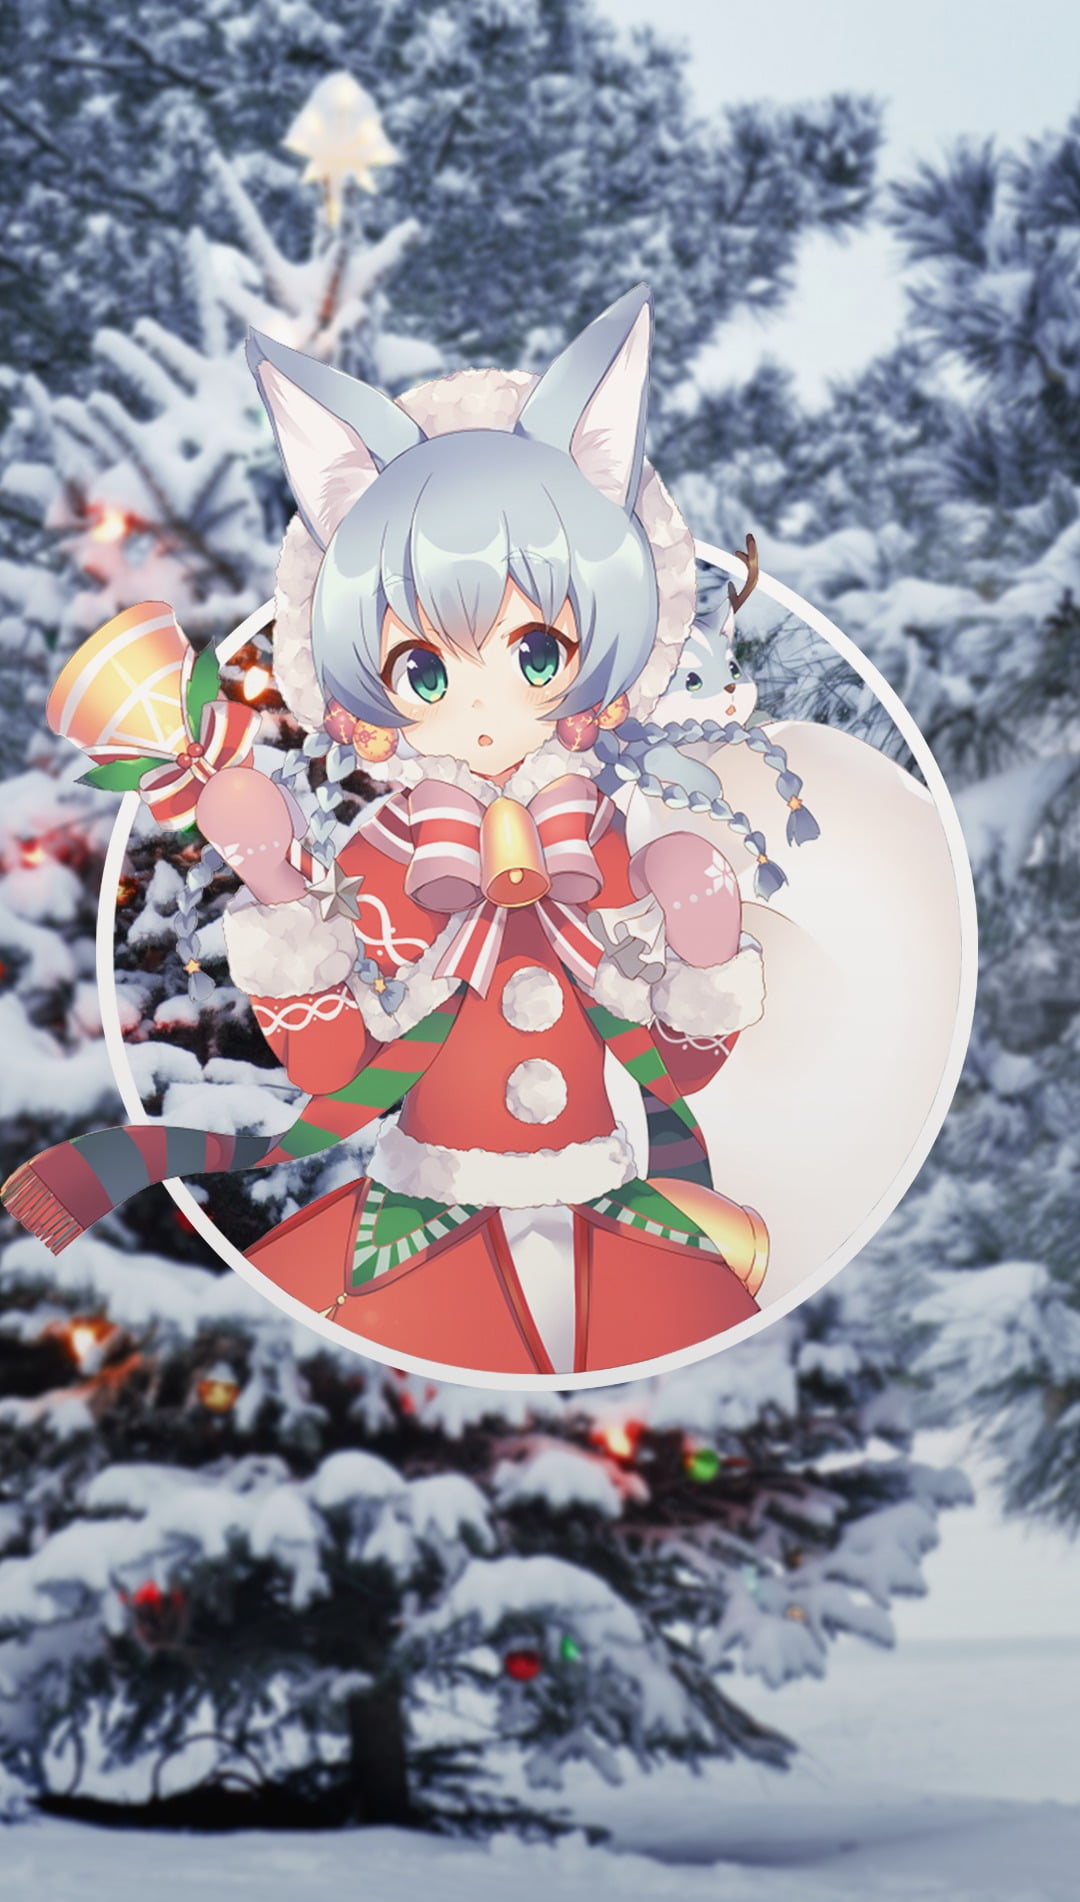 anime, anime girls, picture-in-picture, Christmas, celebration